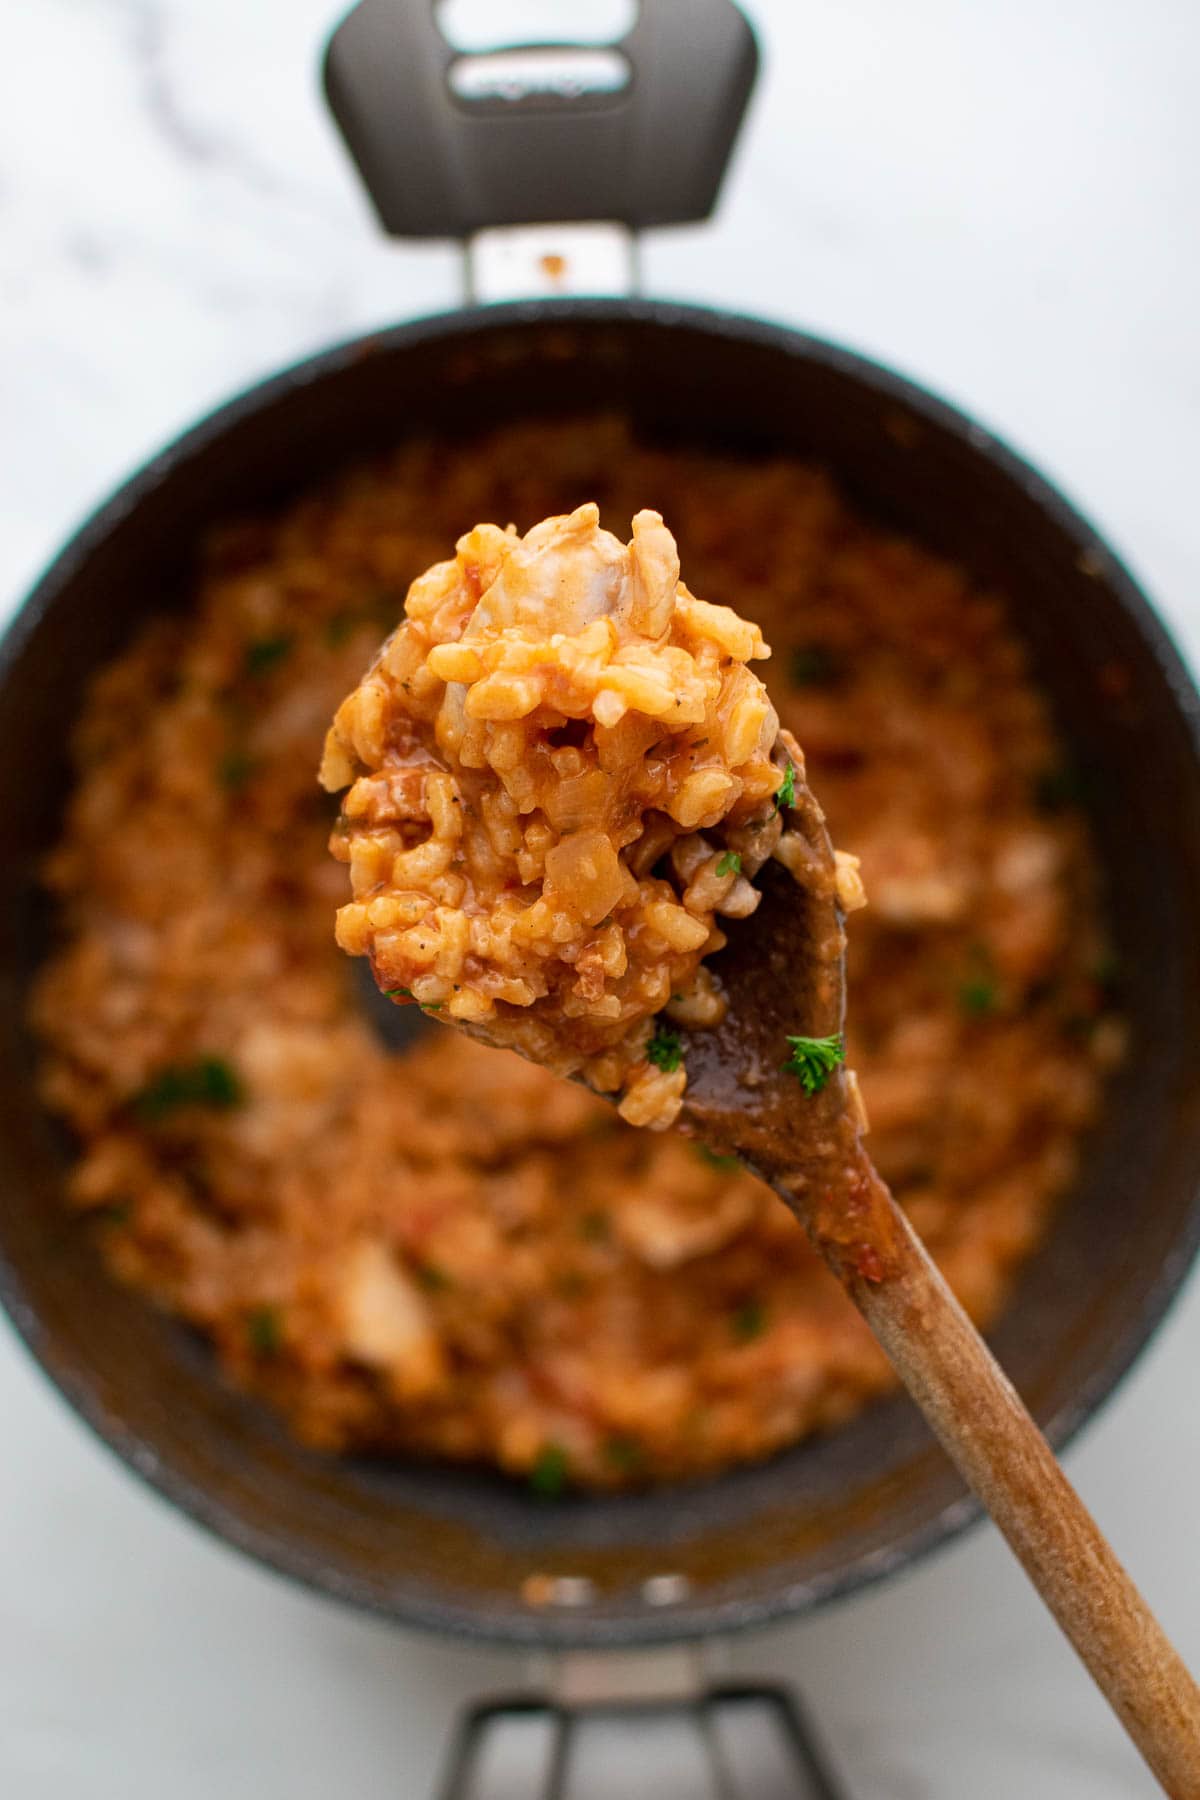 A wooden spoon lifting a serving of risotto out from a pot.